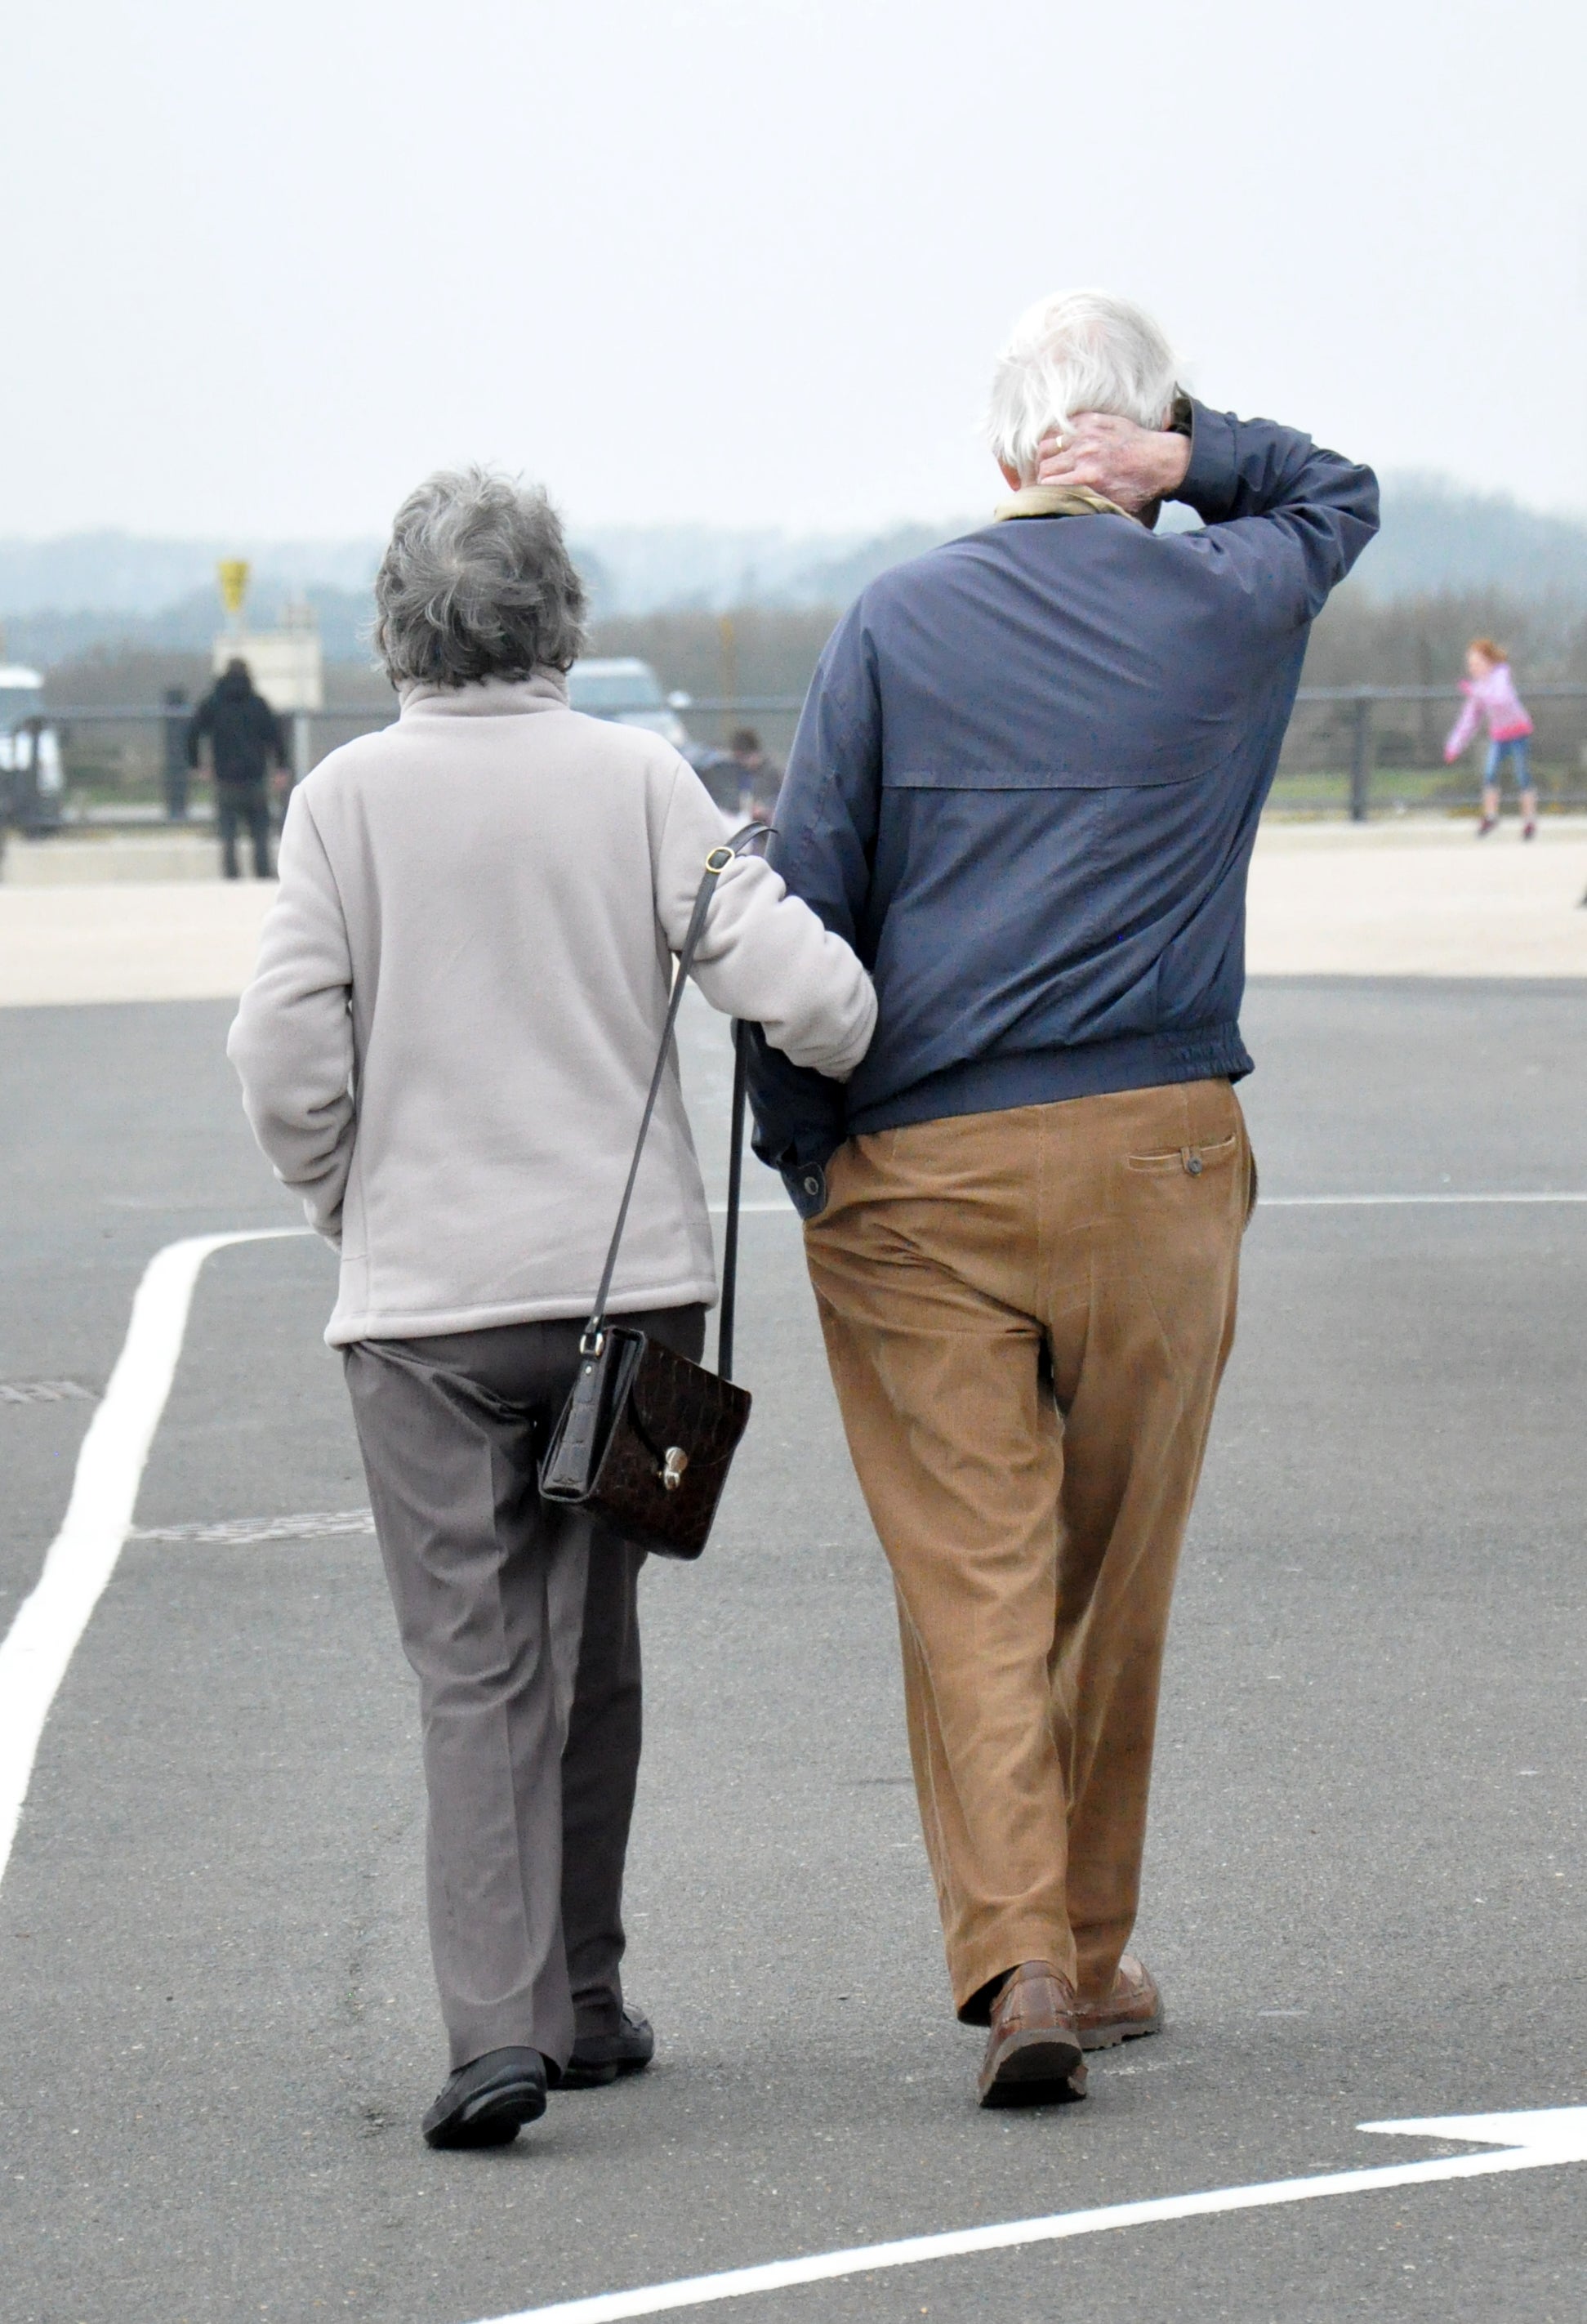 Octogenarians should walk for at least 10 minutes a day, according to a new study (PA)